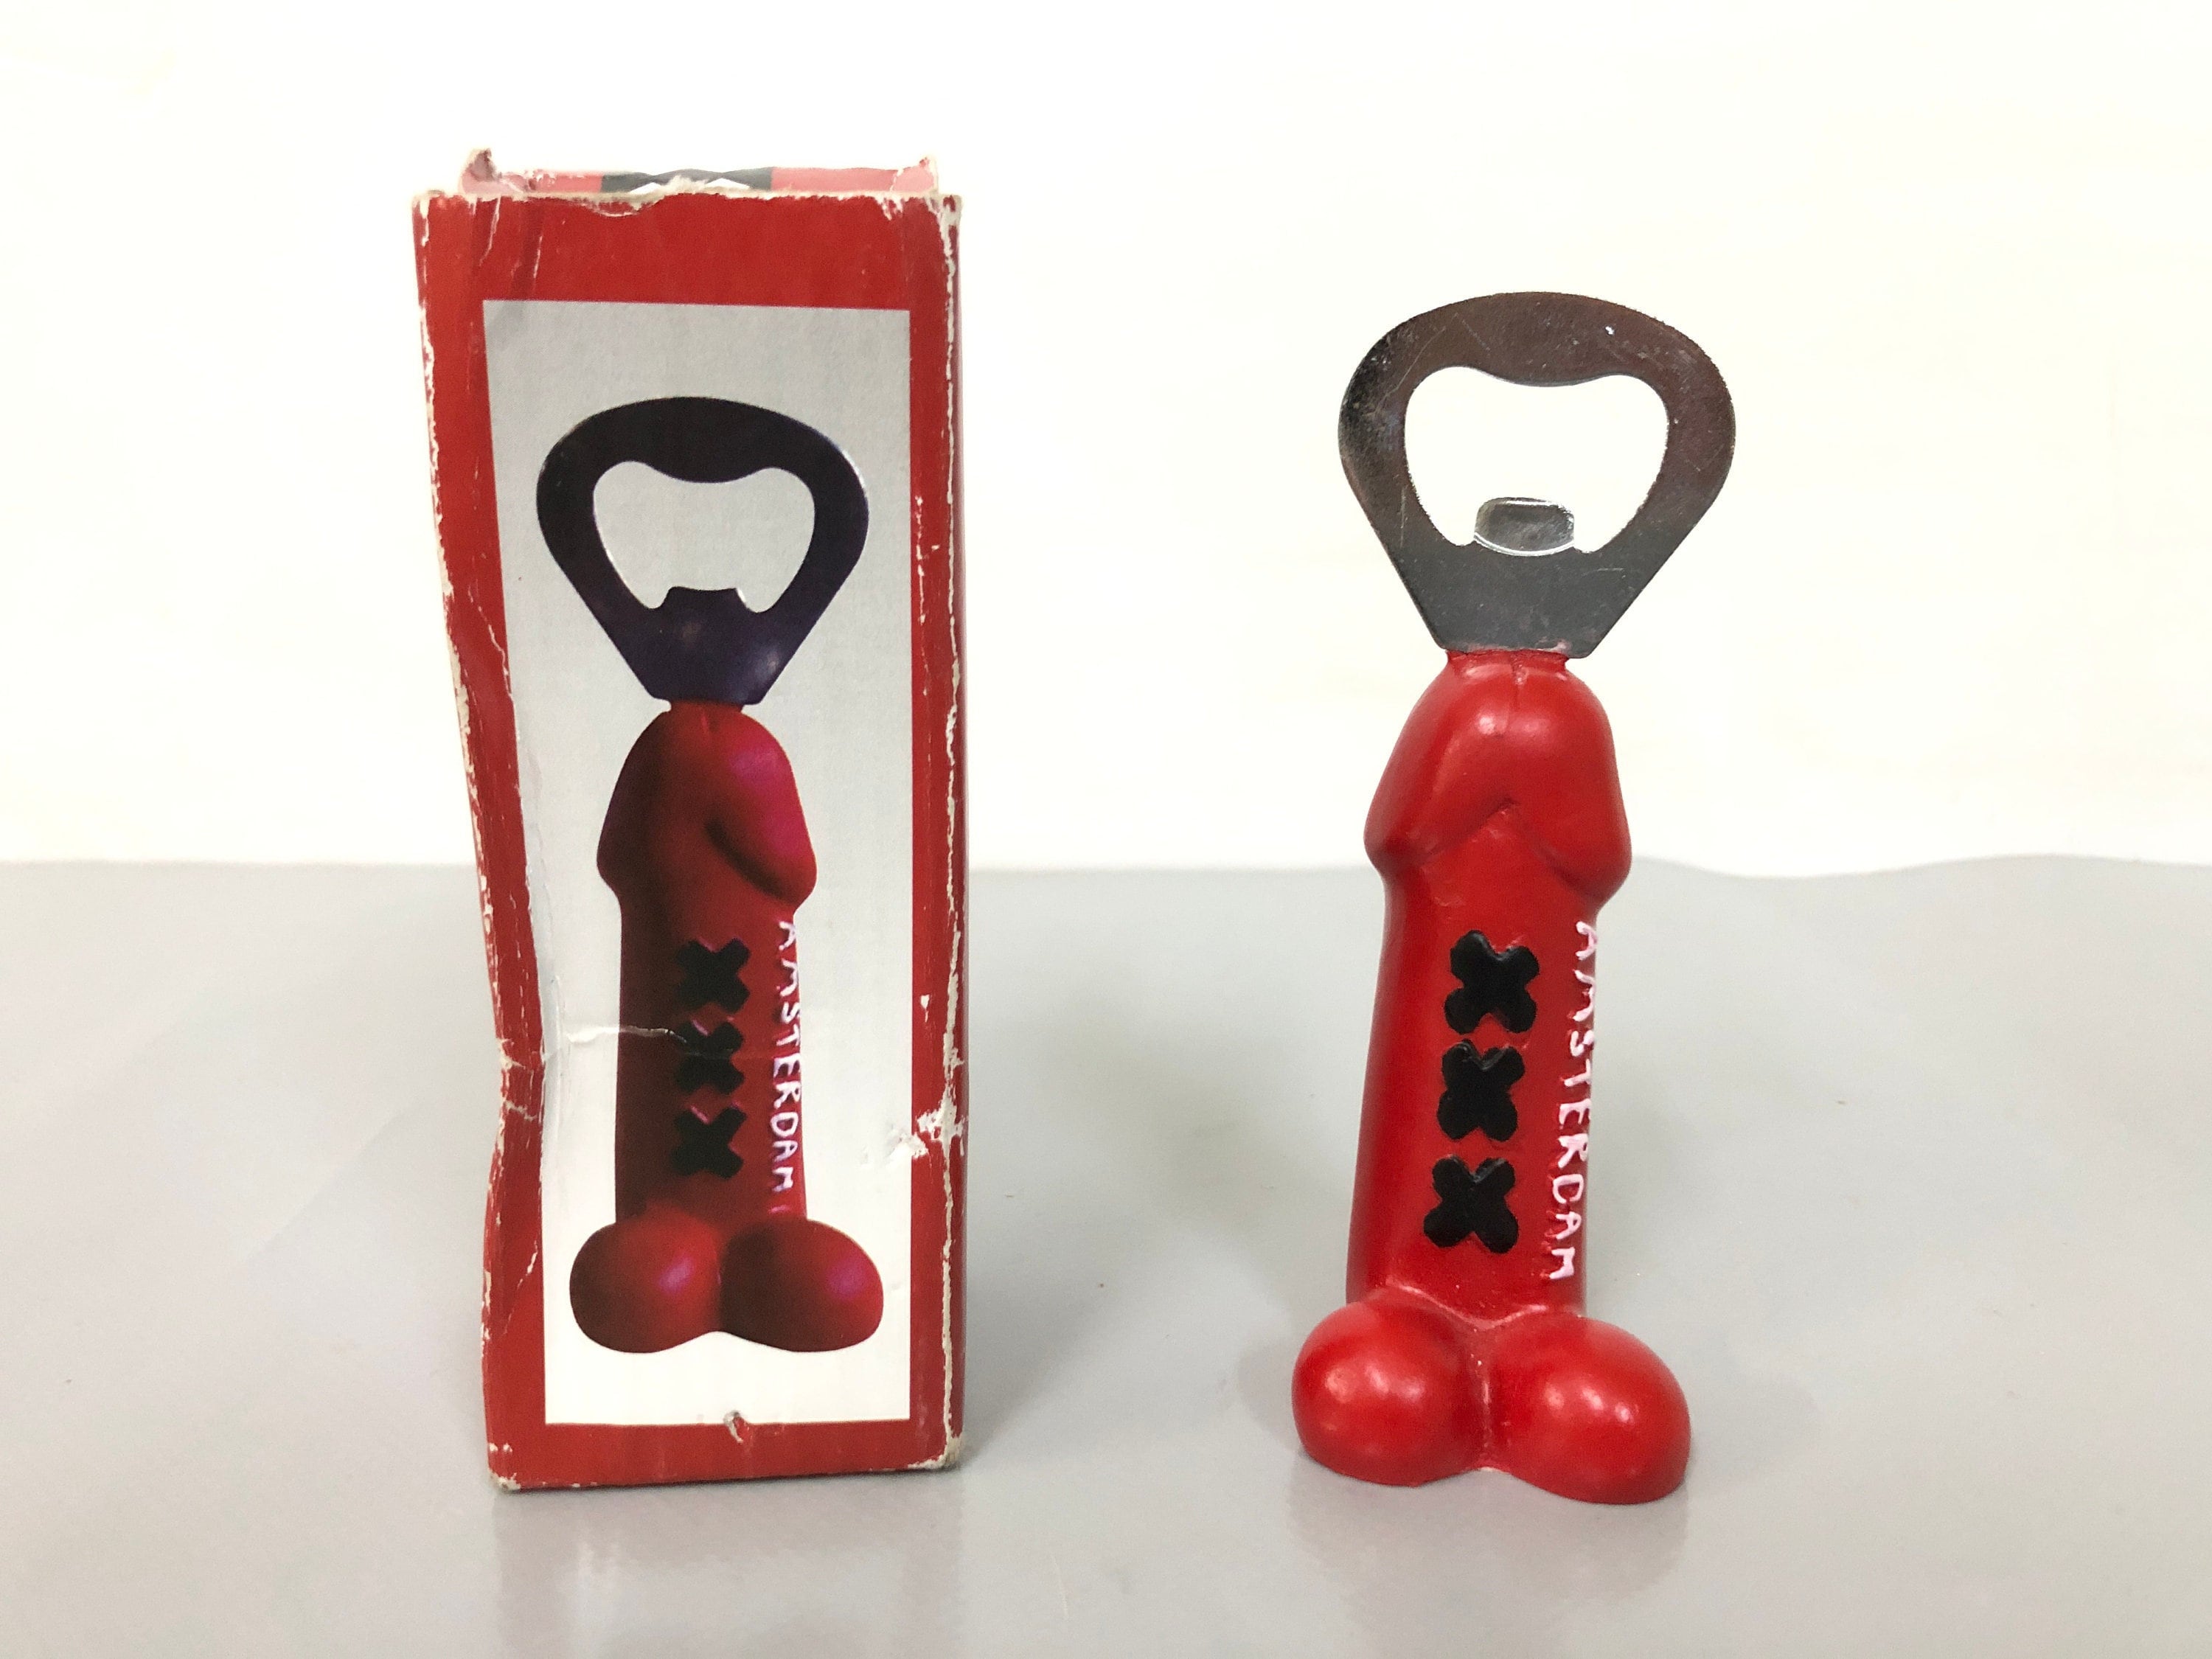 Fun Product's Hand-Carved Wooden Penis Bottle Opener (Black) - Perfect  Novelty Gift for Parties and Birthdays